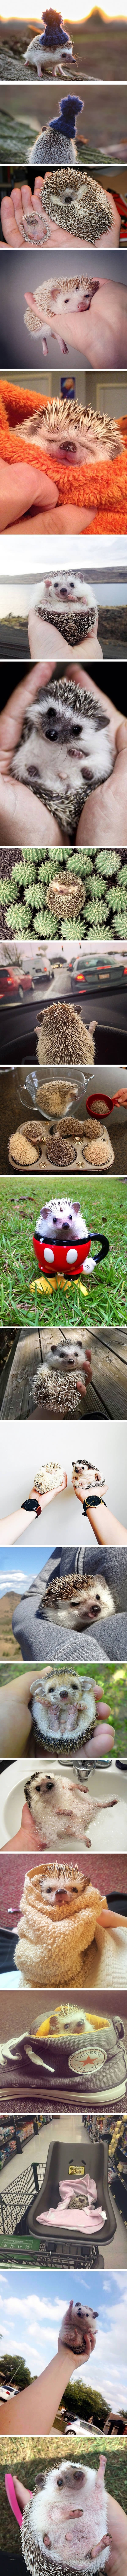 Hedgehogs are adorable!